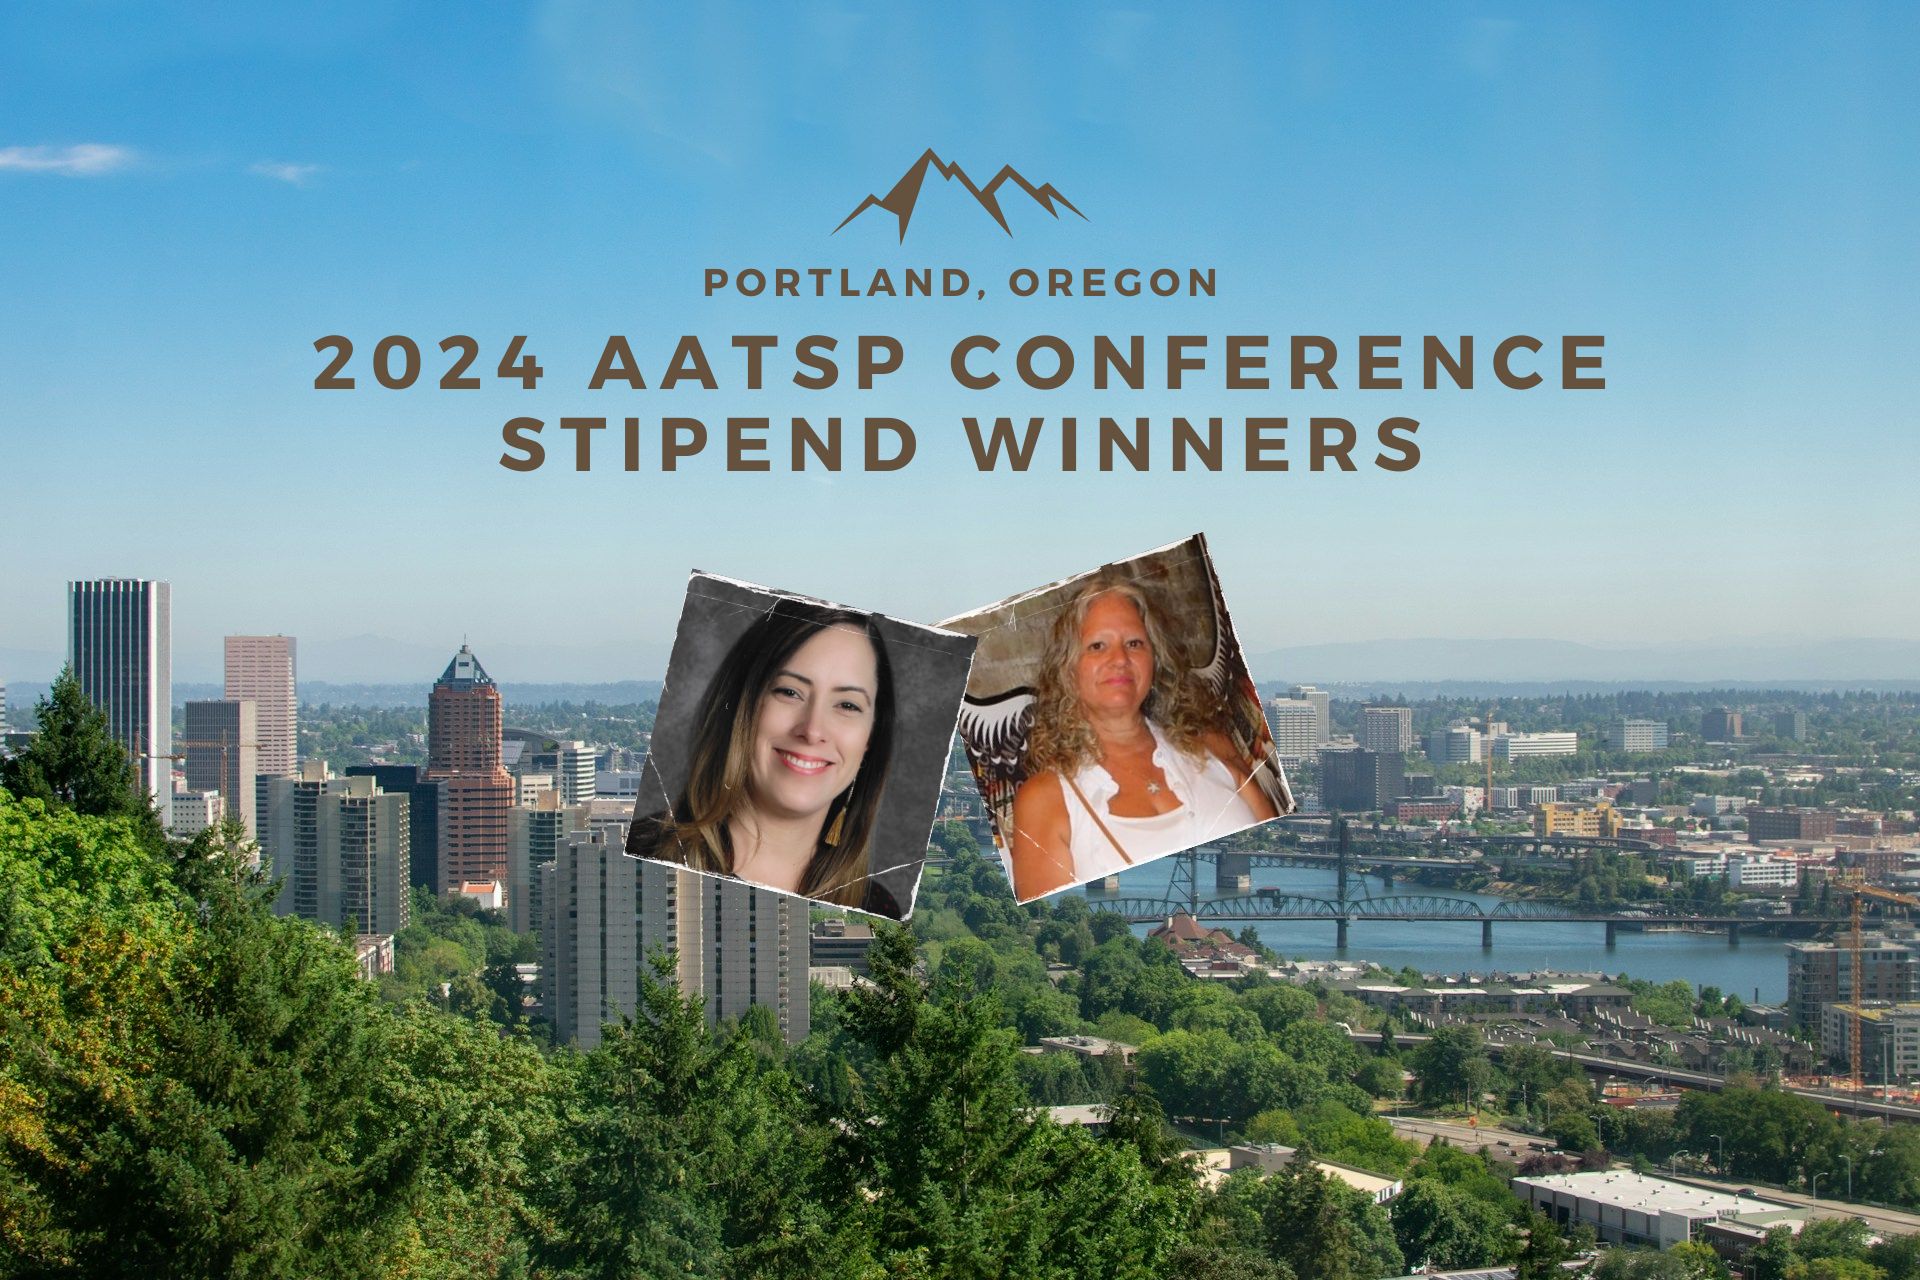 Meet Our 2024 AATSP Conference Stipend Winners